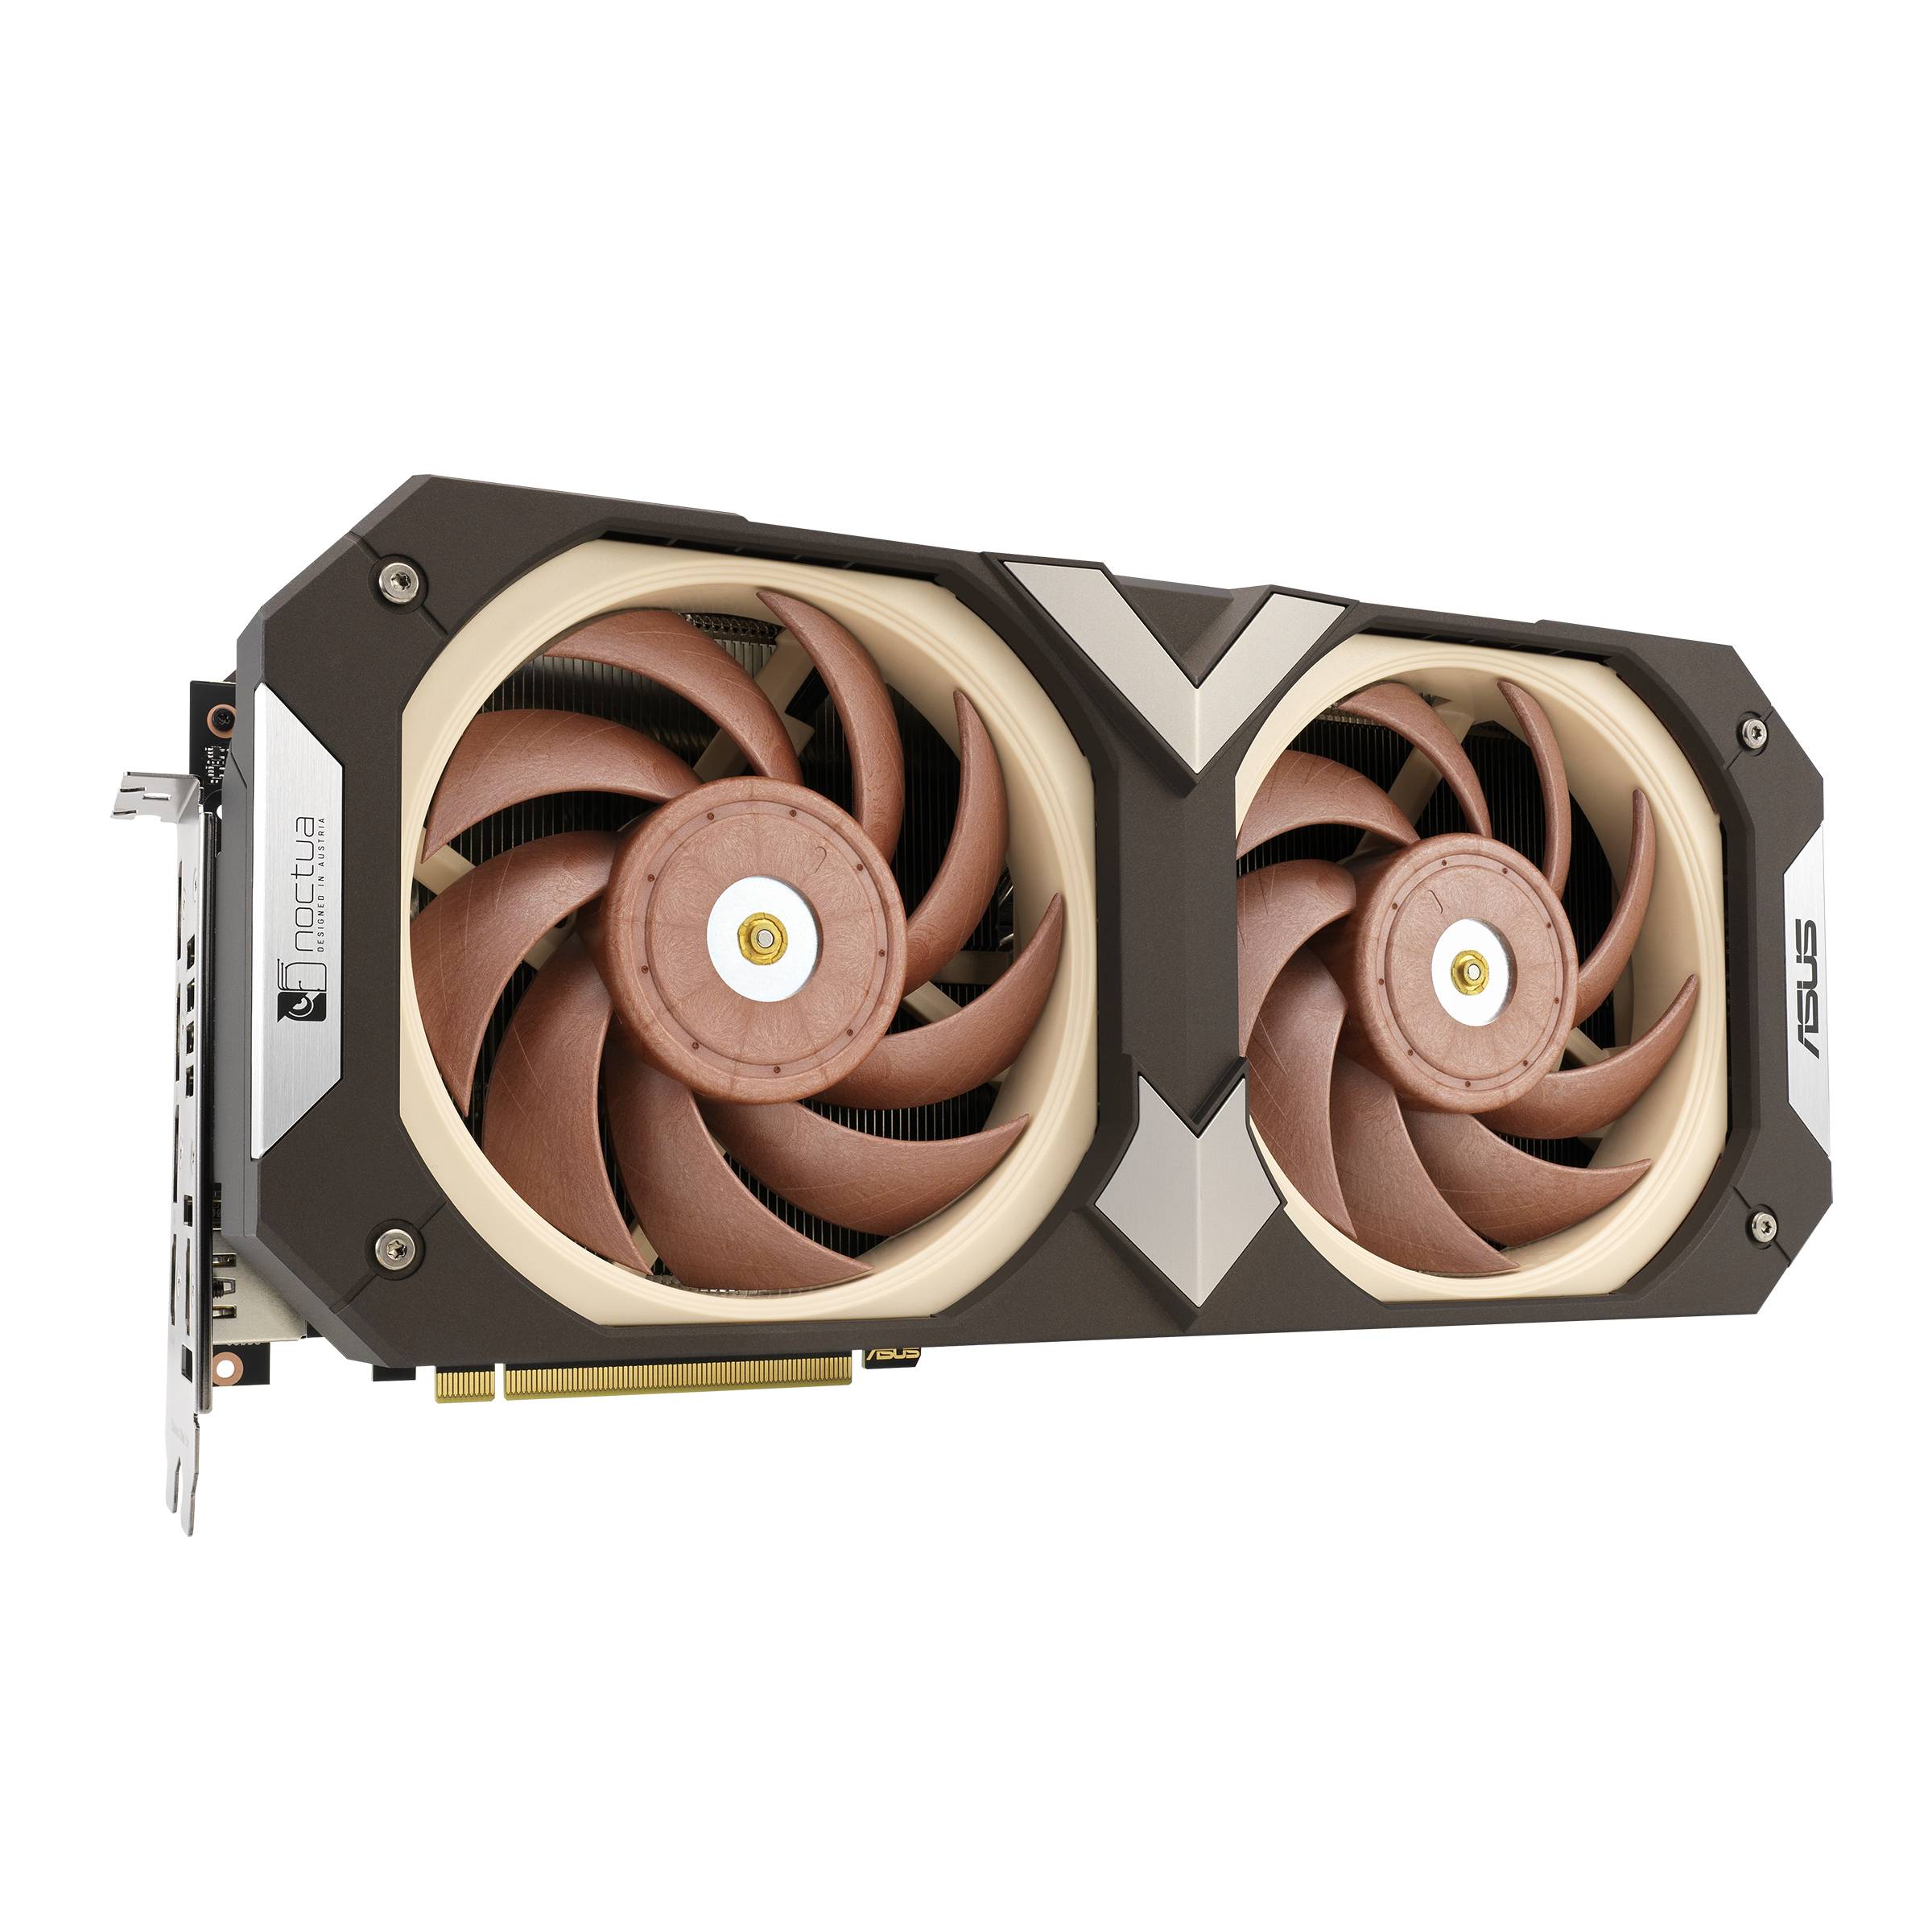 ASUS GeForce RTX 3080 Graphics Card Noctua Edition Revealed